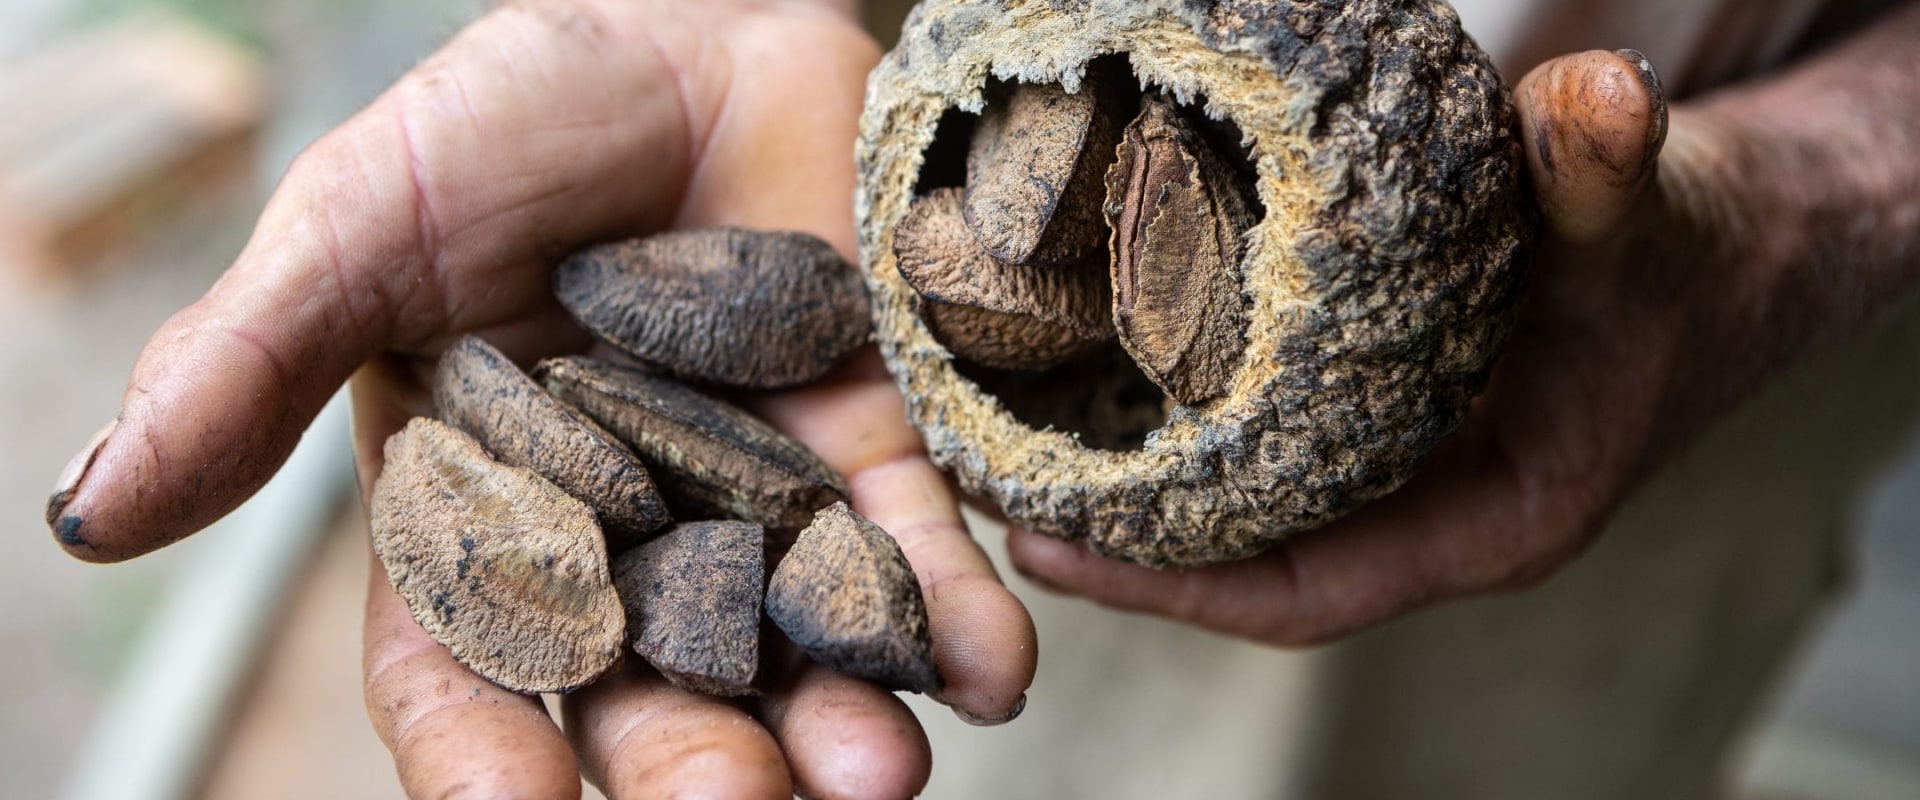 Why are brazil nuts hard to find?